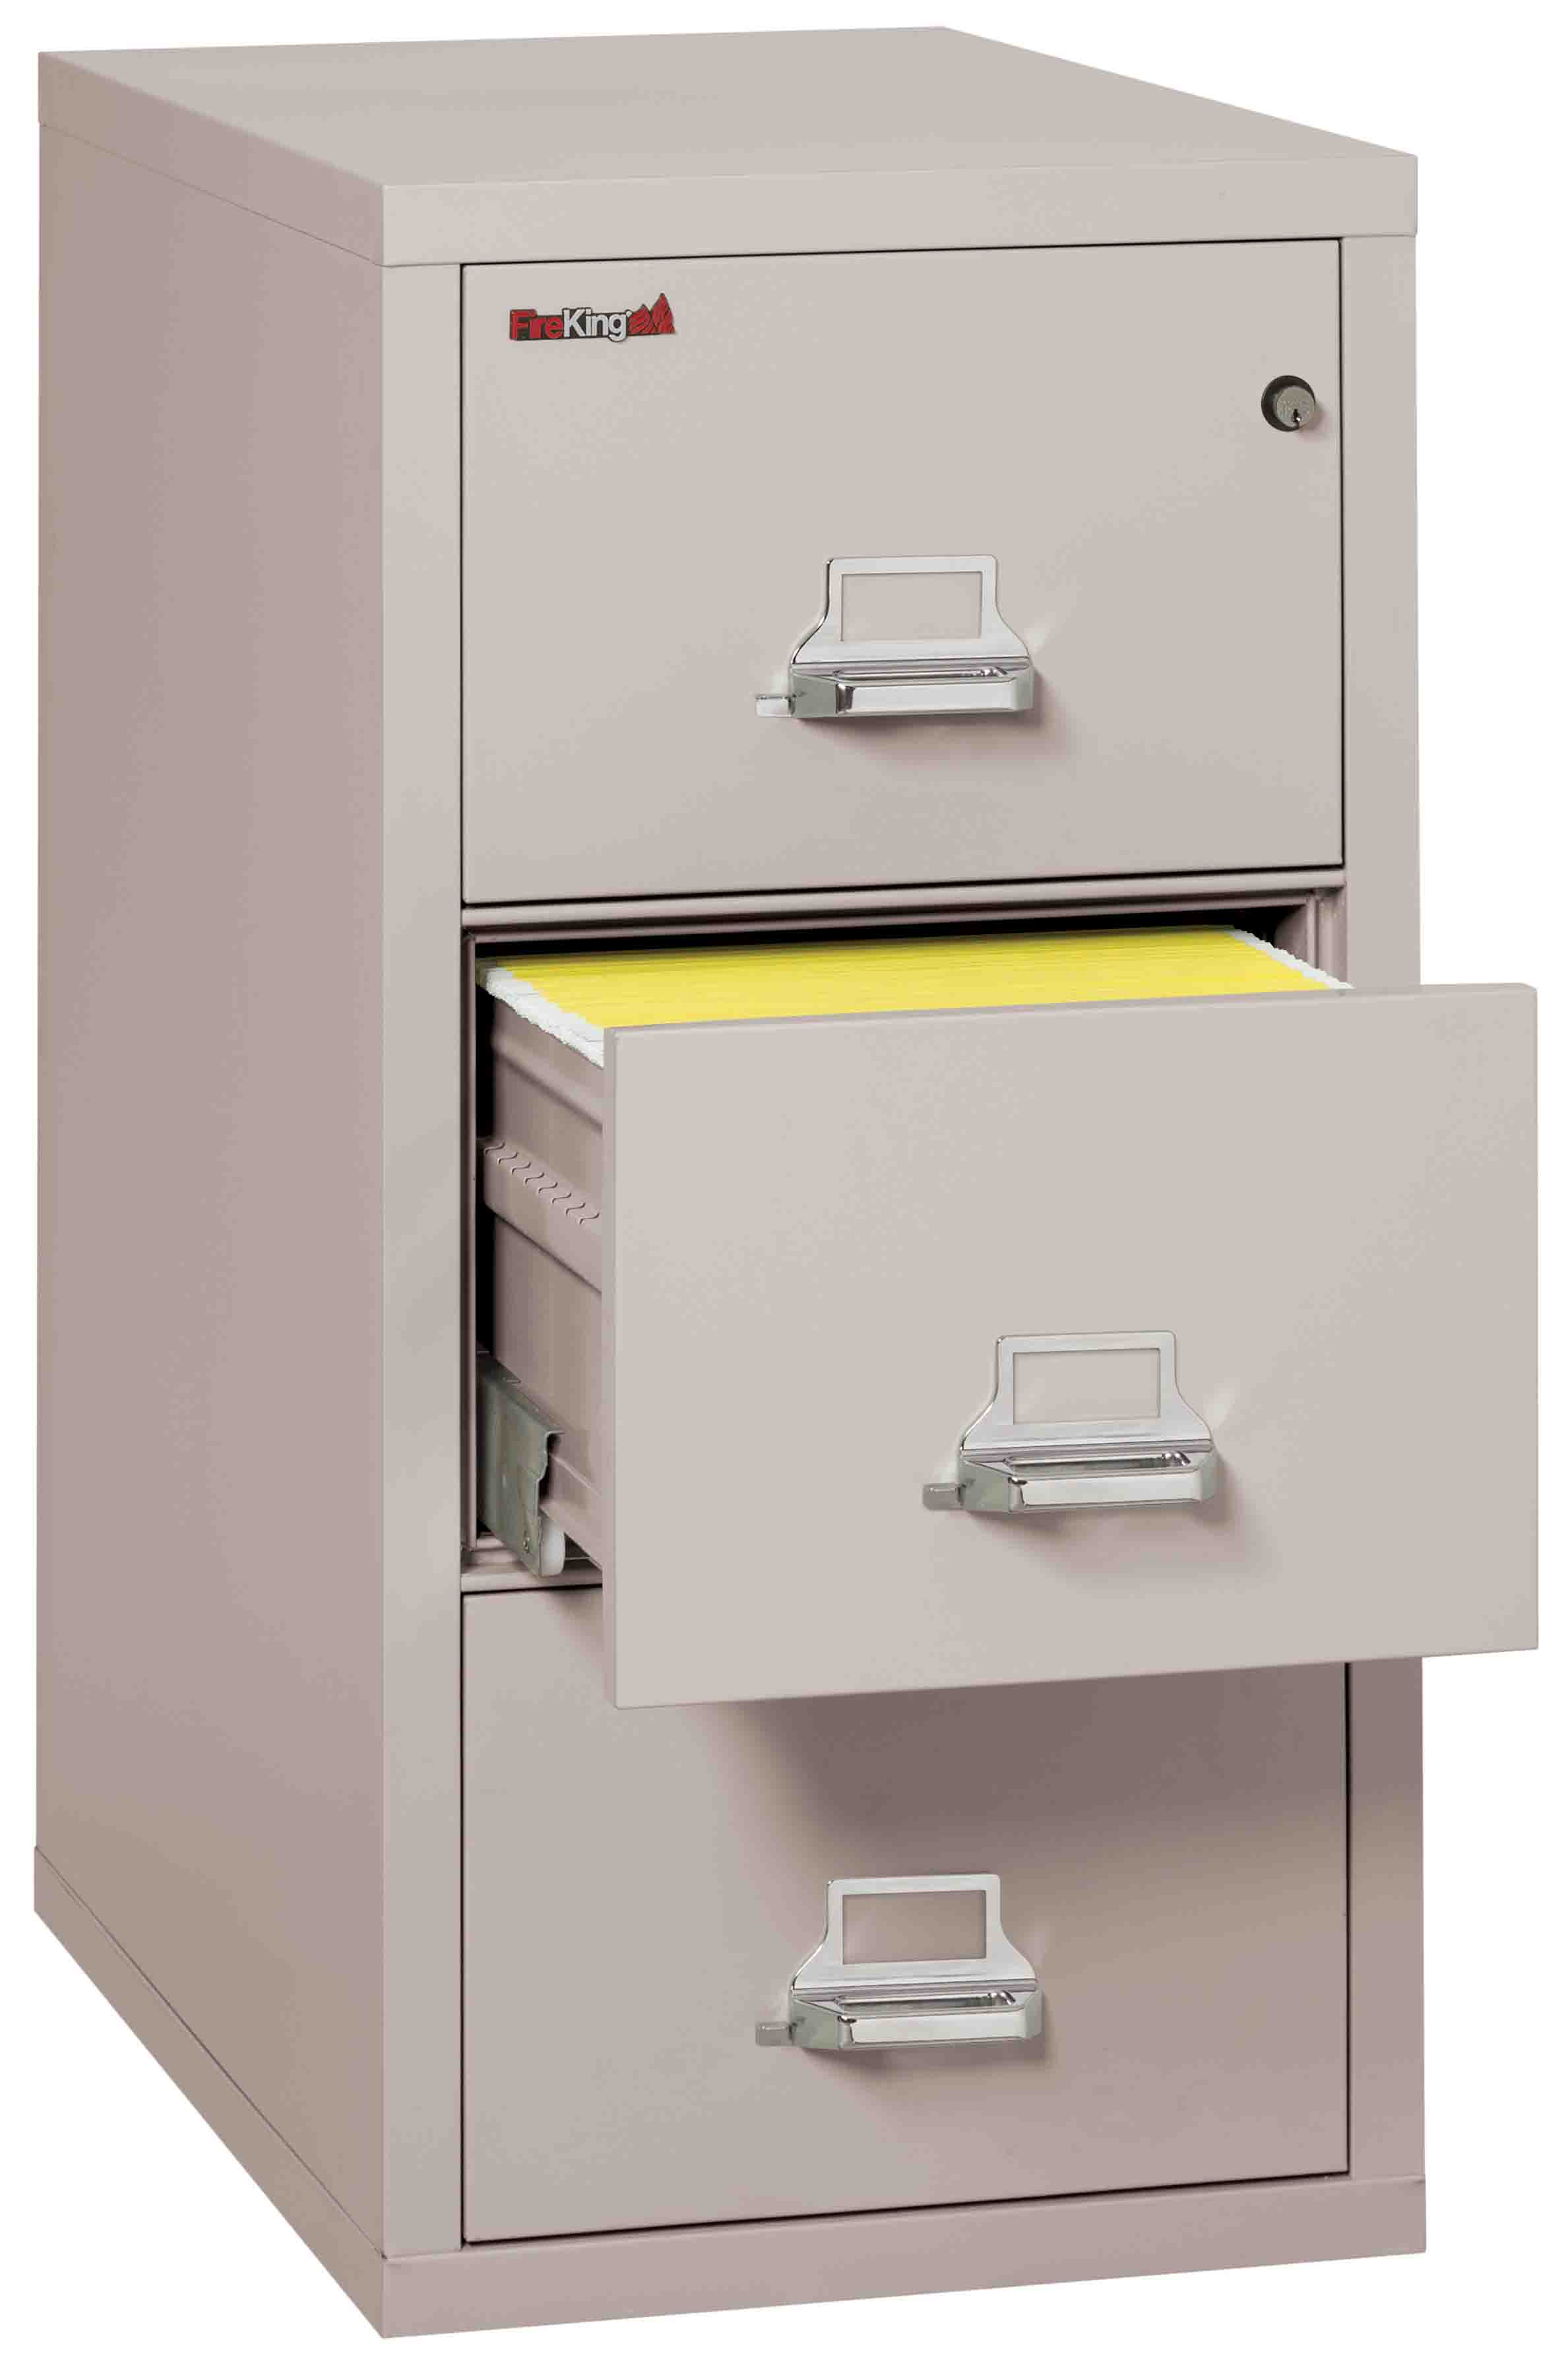 Fire King 3-1831-C - Vertical Fireproof File Cabinets - 3 Drawer 1 Hour Fire Rating